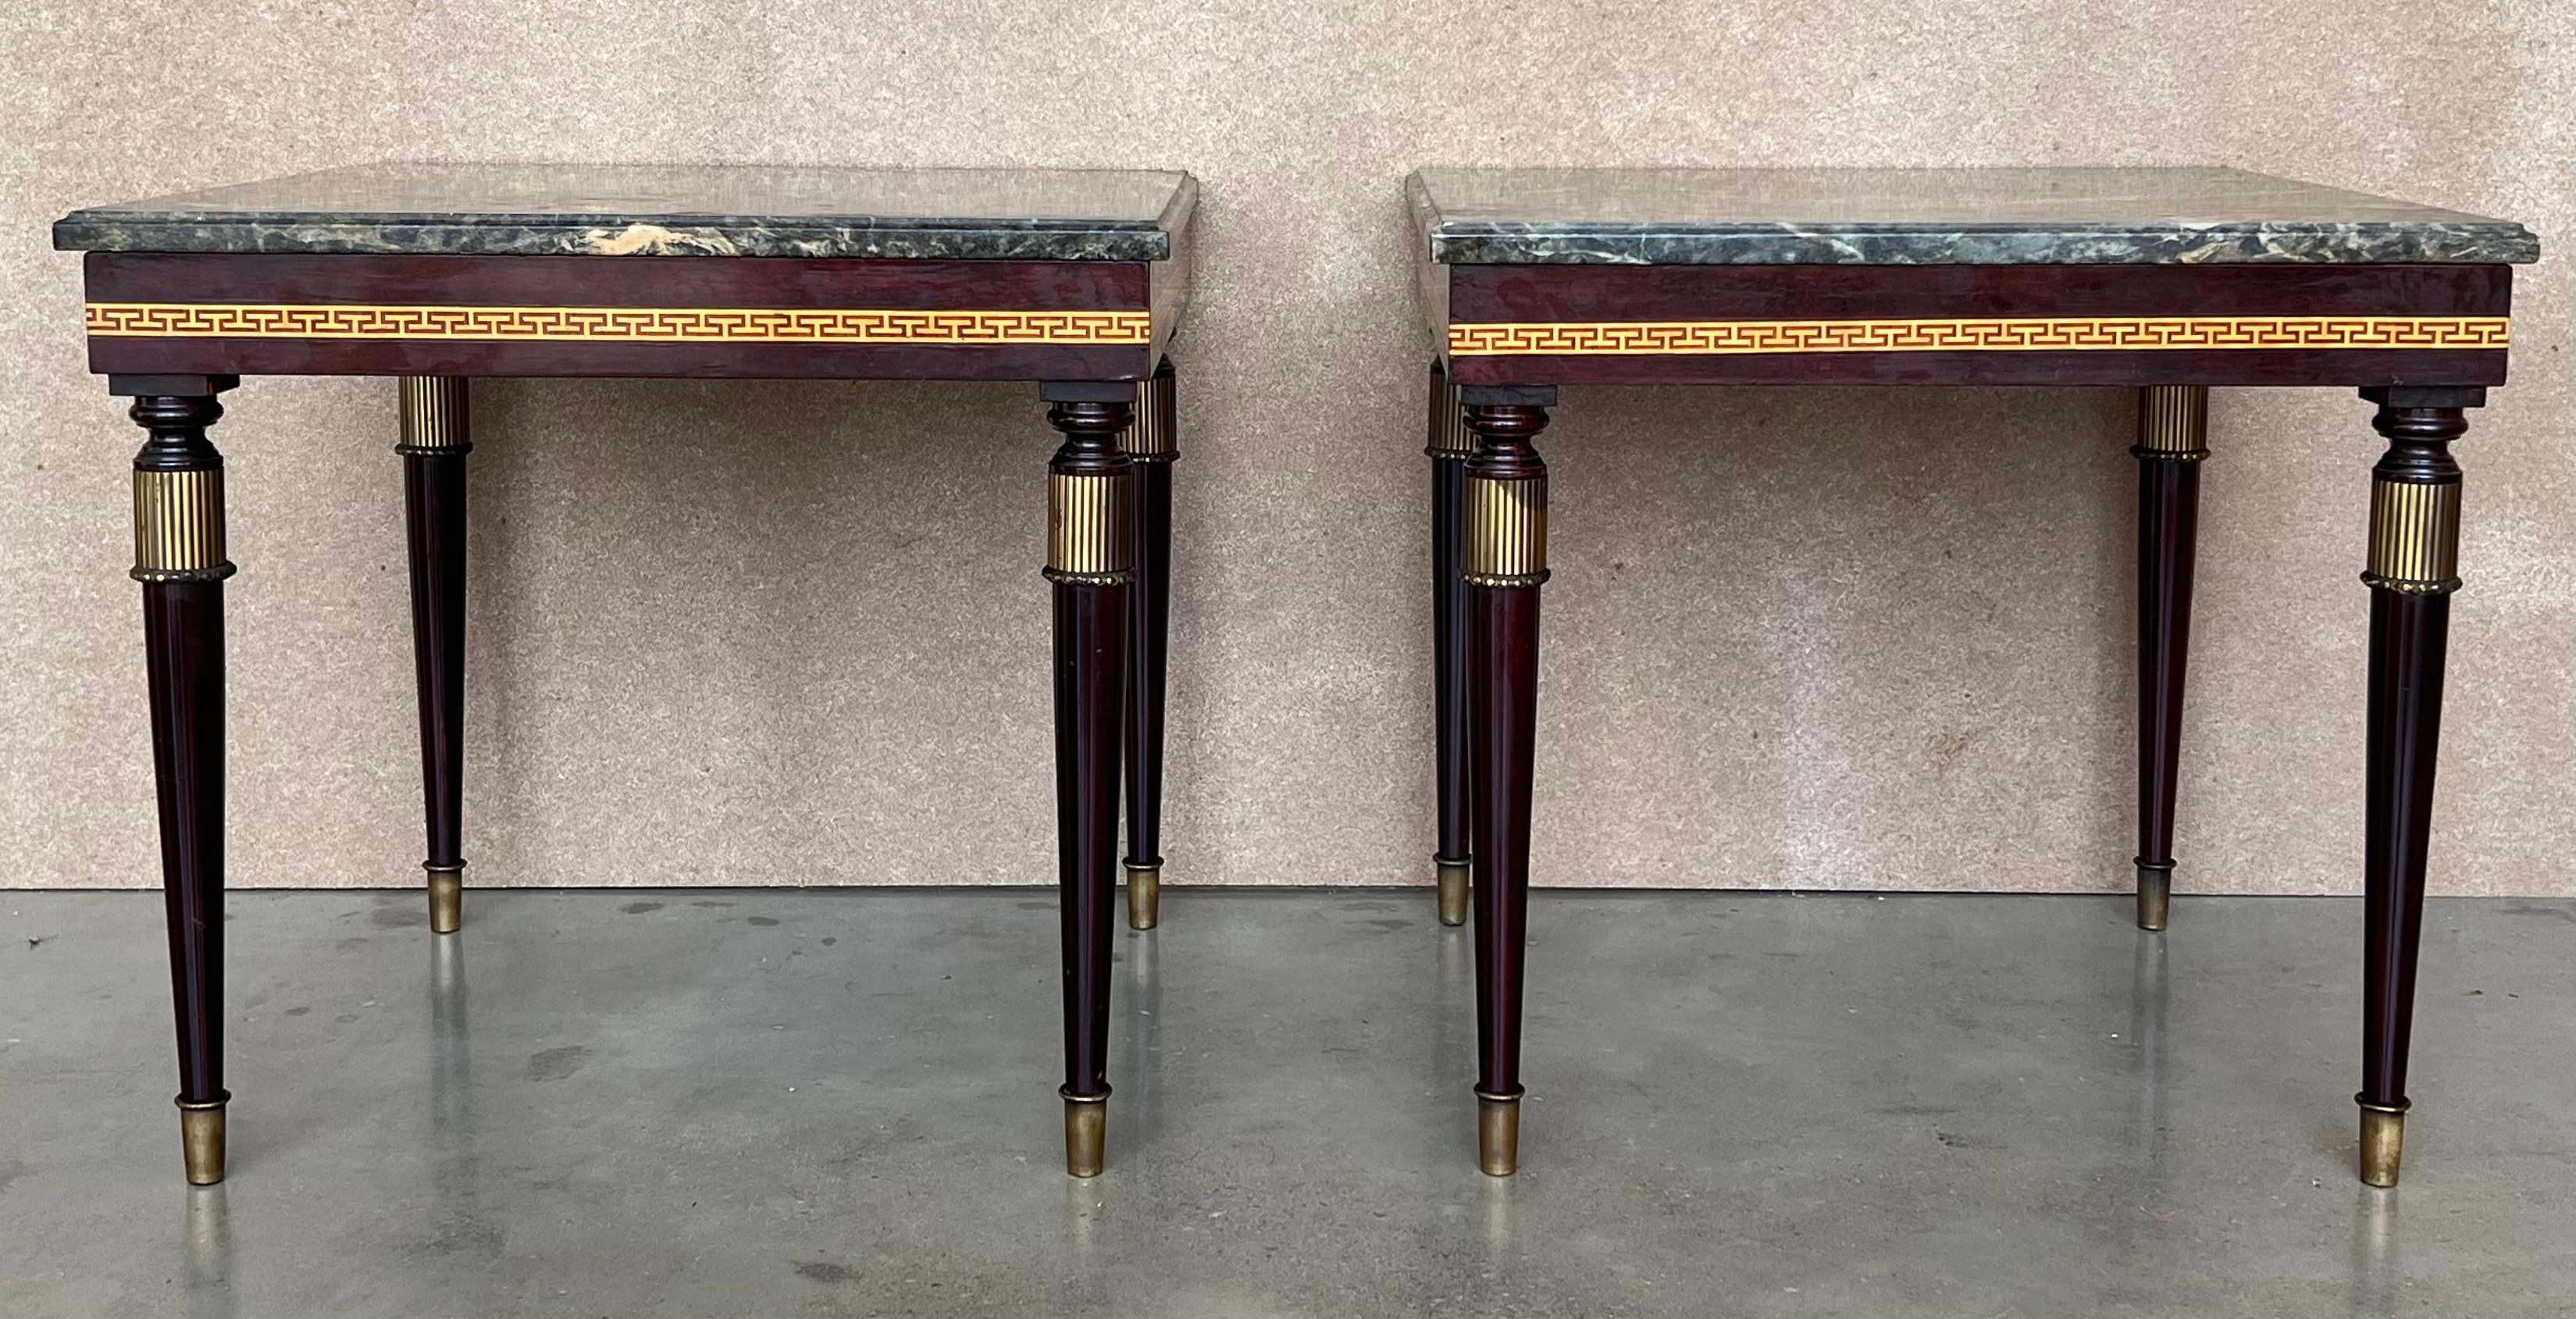 This elegant set of Louis XV style tables with marble top are made of mahogany with marquetry in four sides edges, with four tapered legs. The tables has exquisite detailed bronze mounts and marble top.

